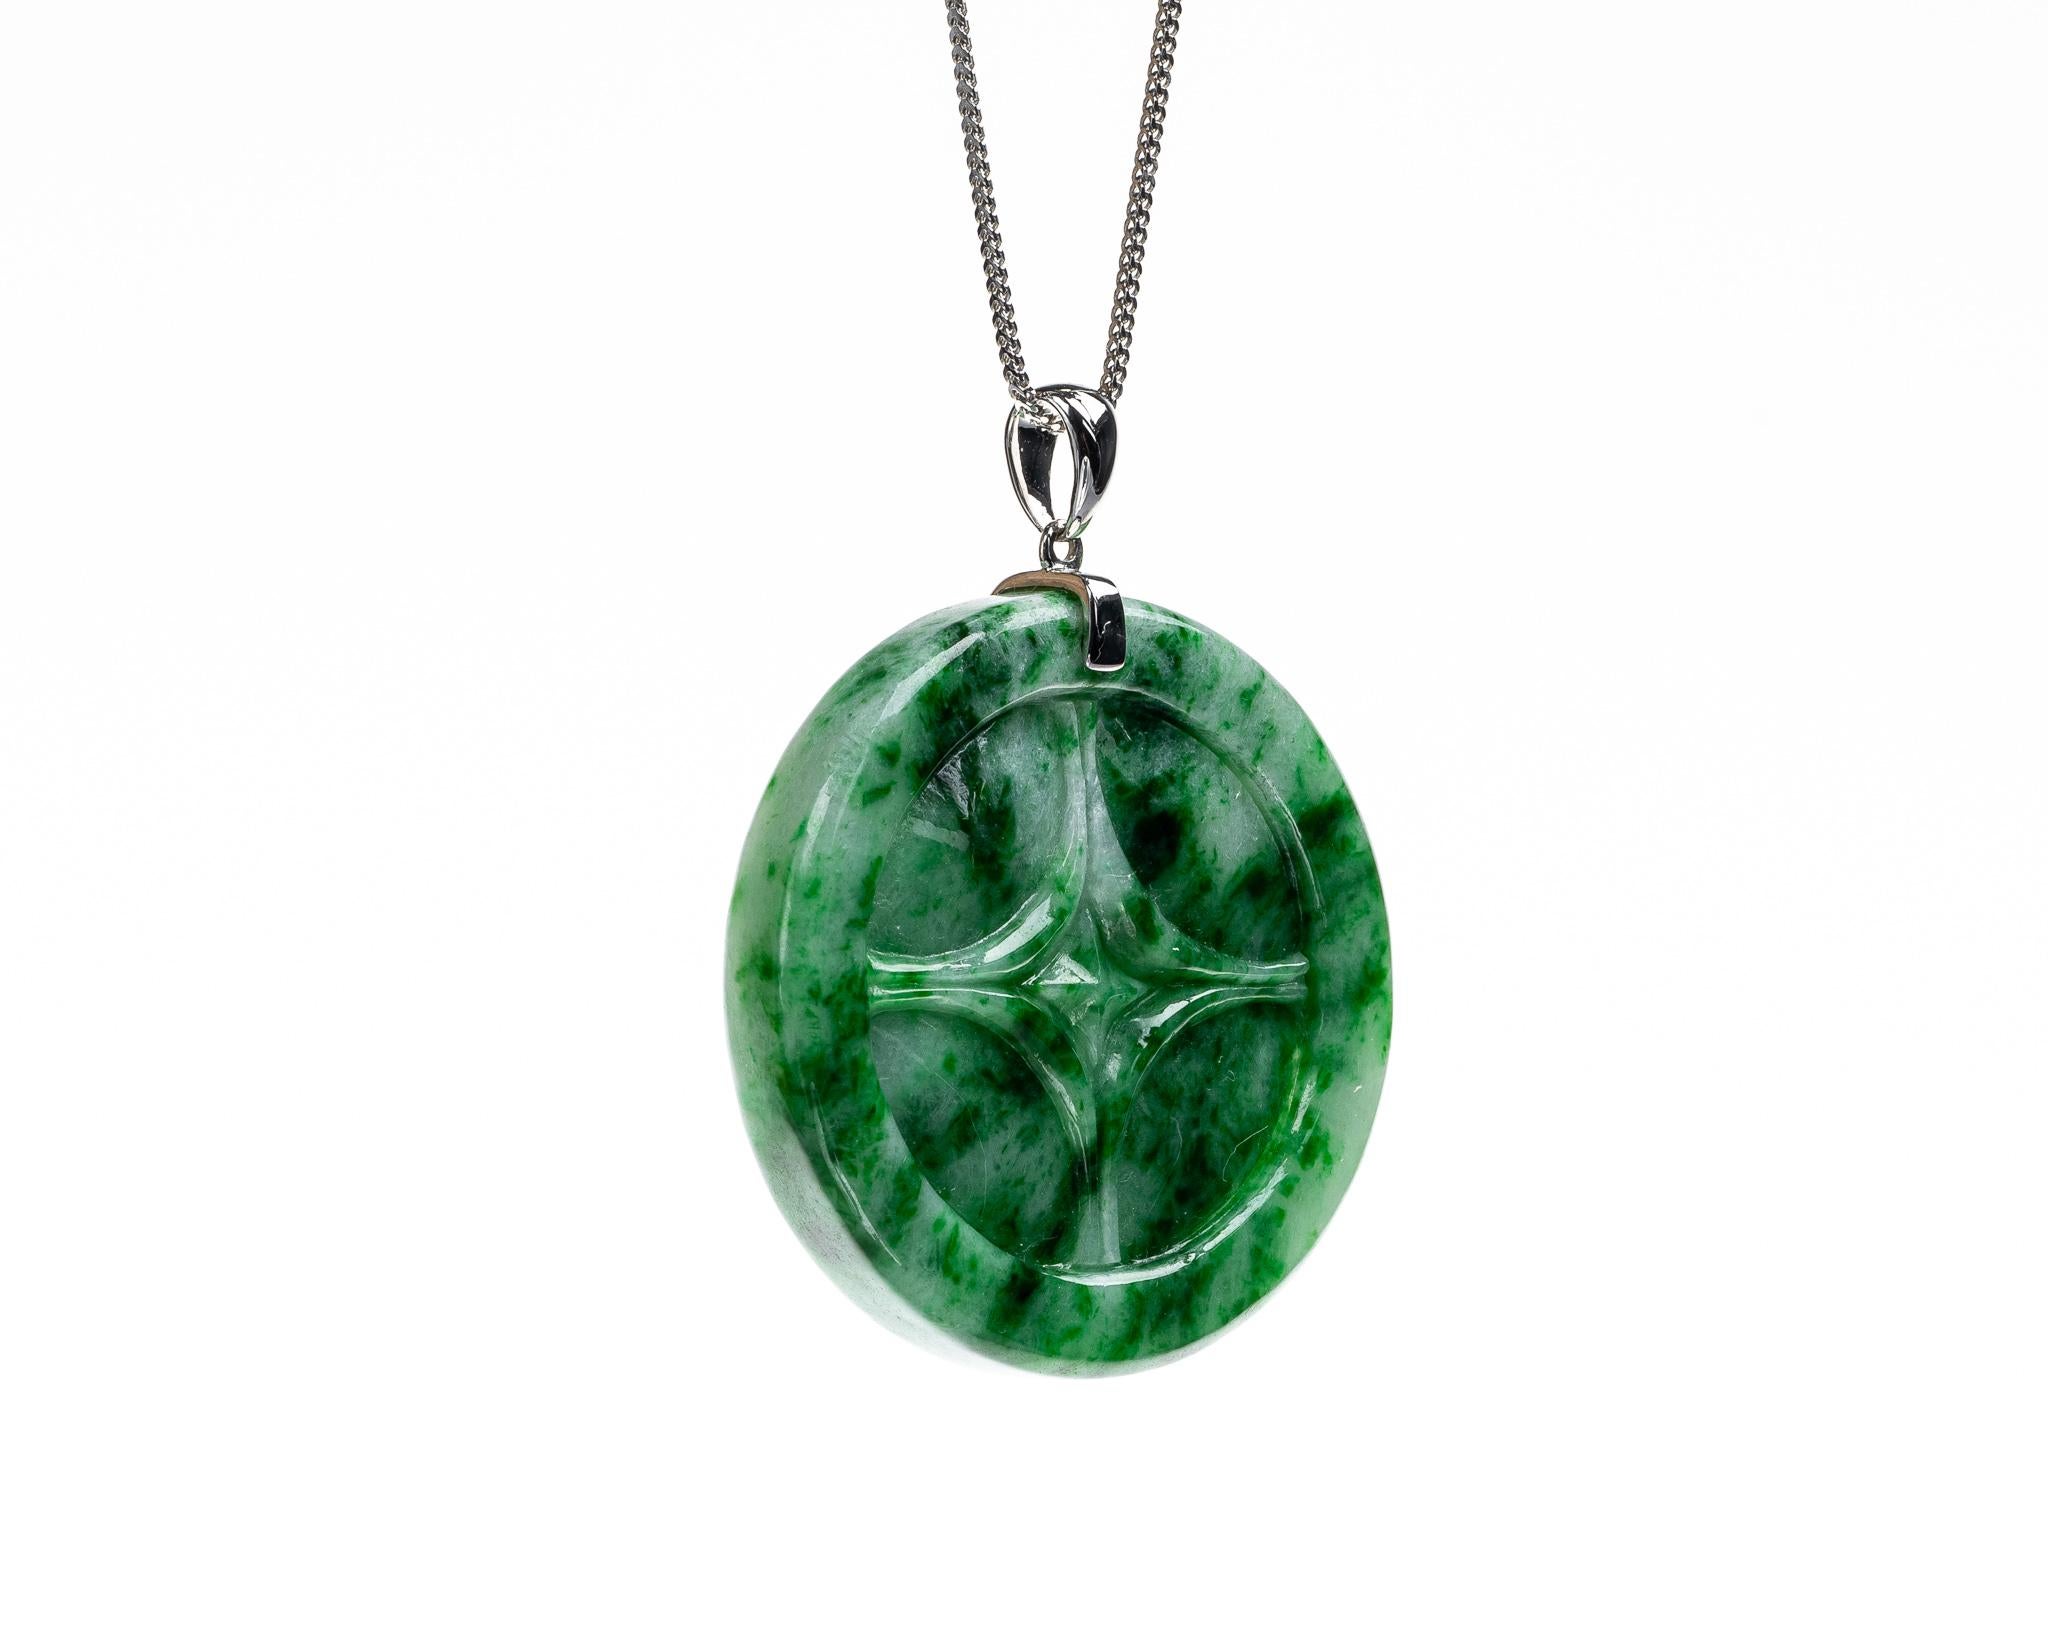 This is an all natural, untreated jadeite jade carved coin pendant set on an 18K white gold bail.  The carved coin symbolizes money, wealth and prosperity.
   
It measures 1.49 inches (38mm) x 1.49 inches (38mm) with thickness of 0.25 inches (6.4mm)